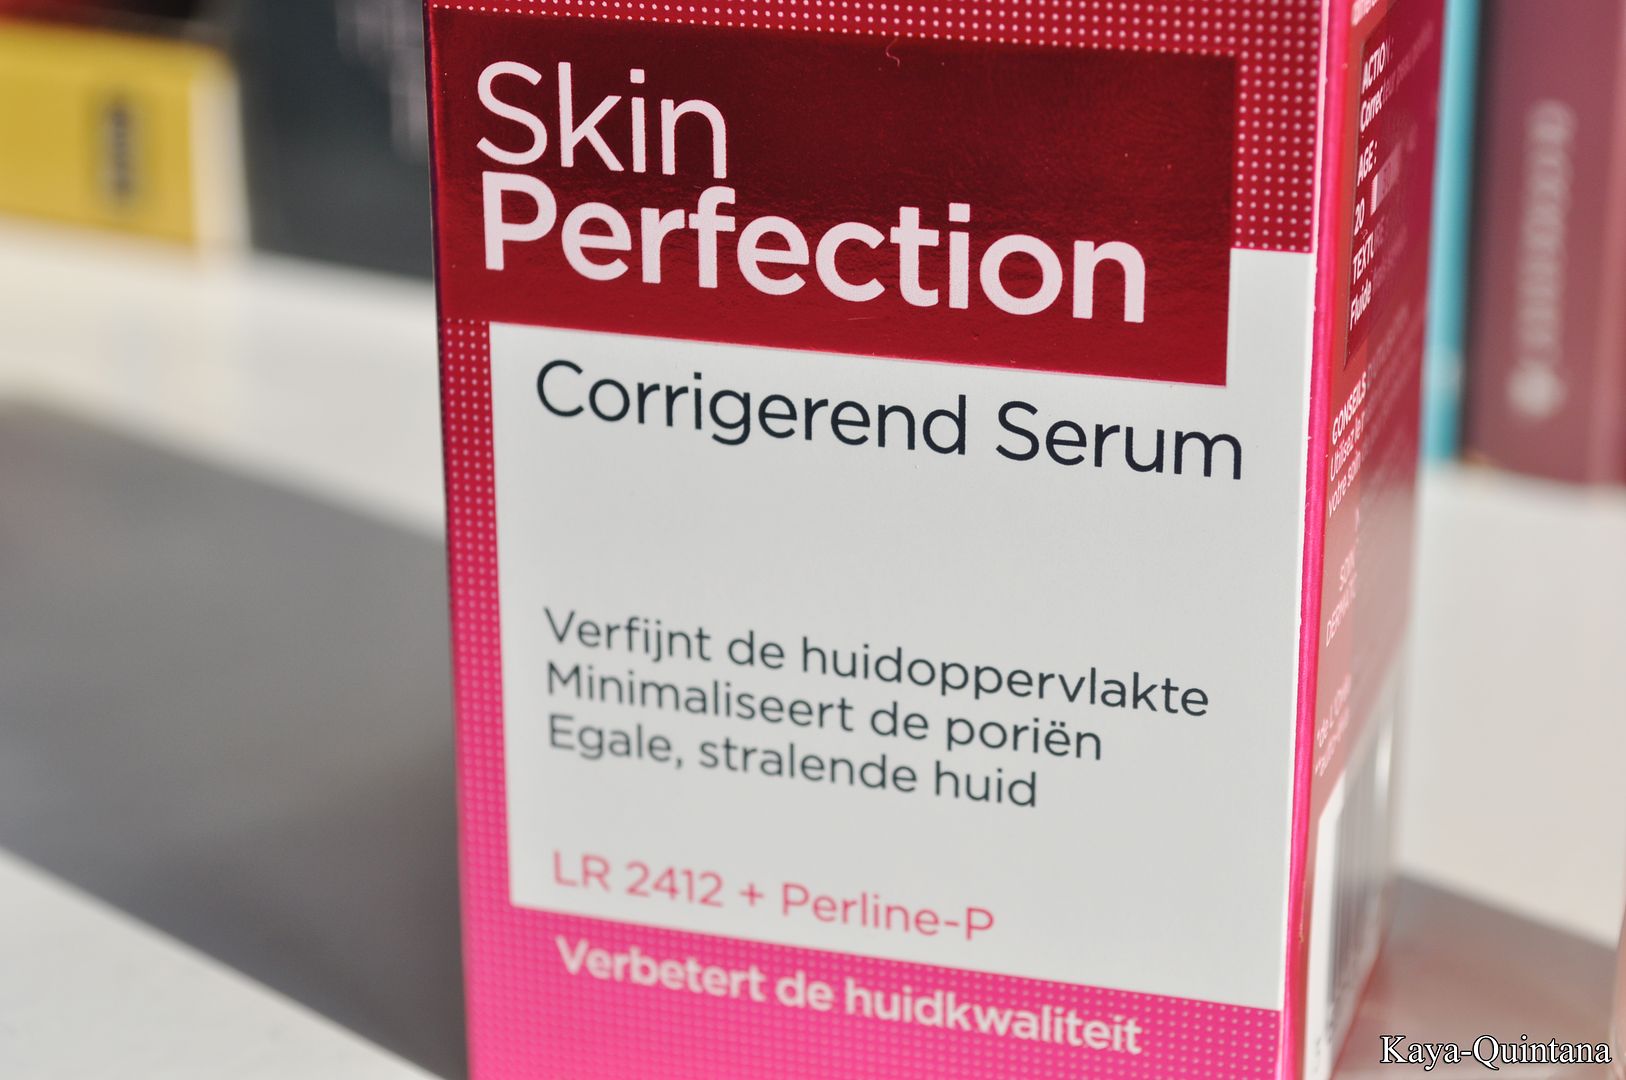 l'oreal skin perfection corrigerend serum review